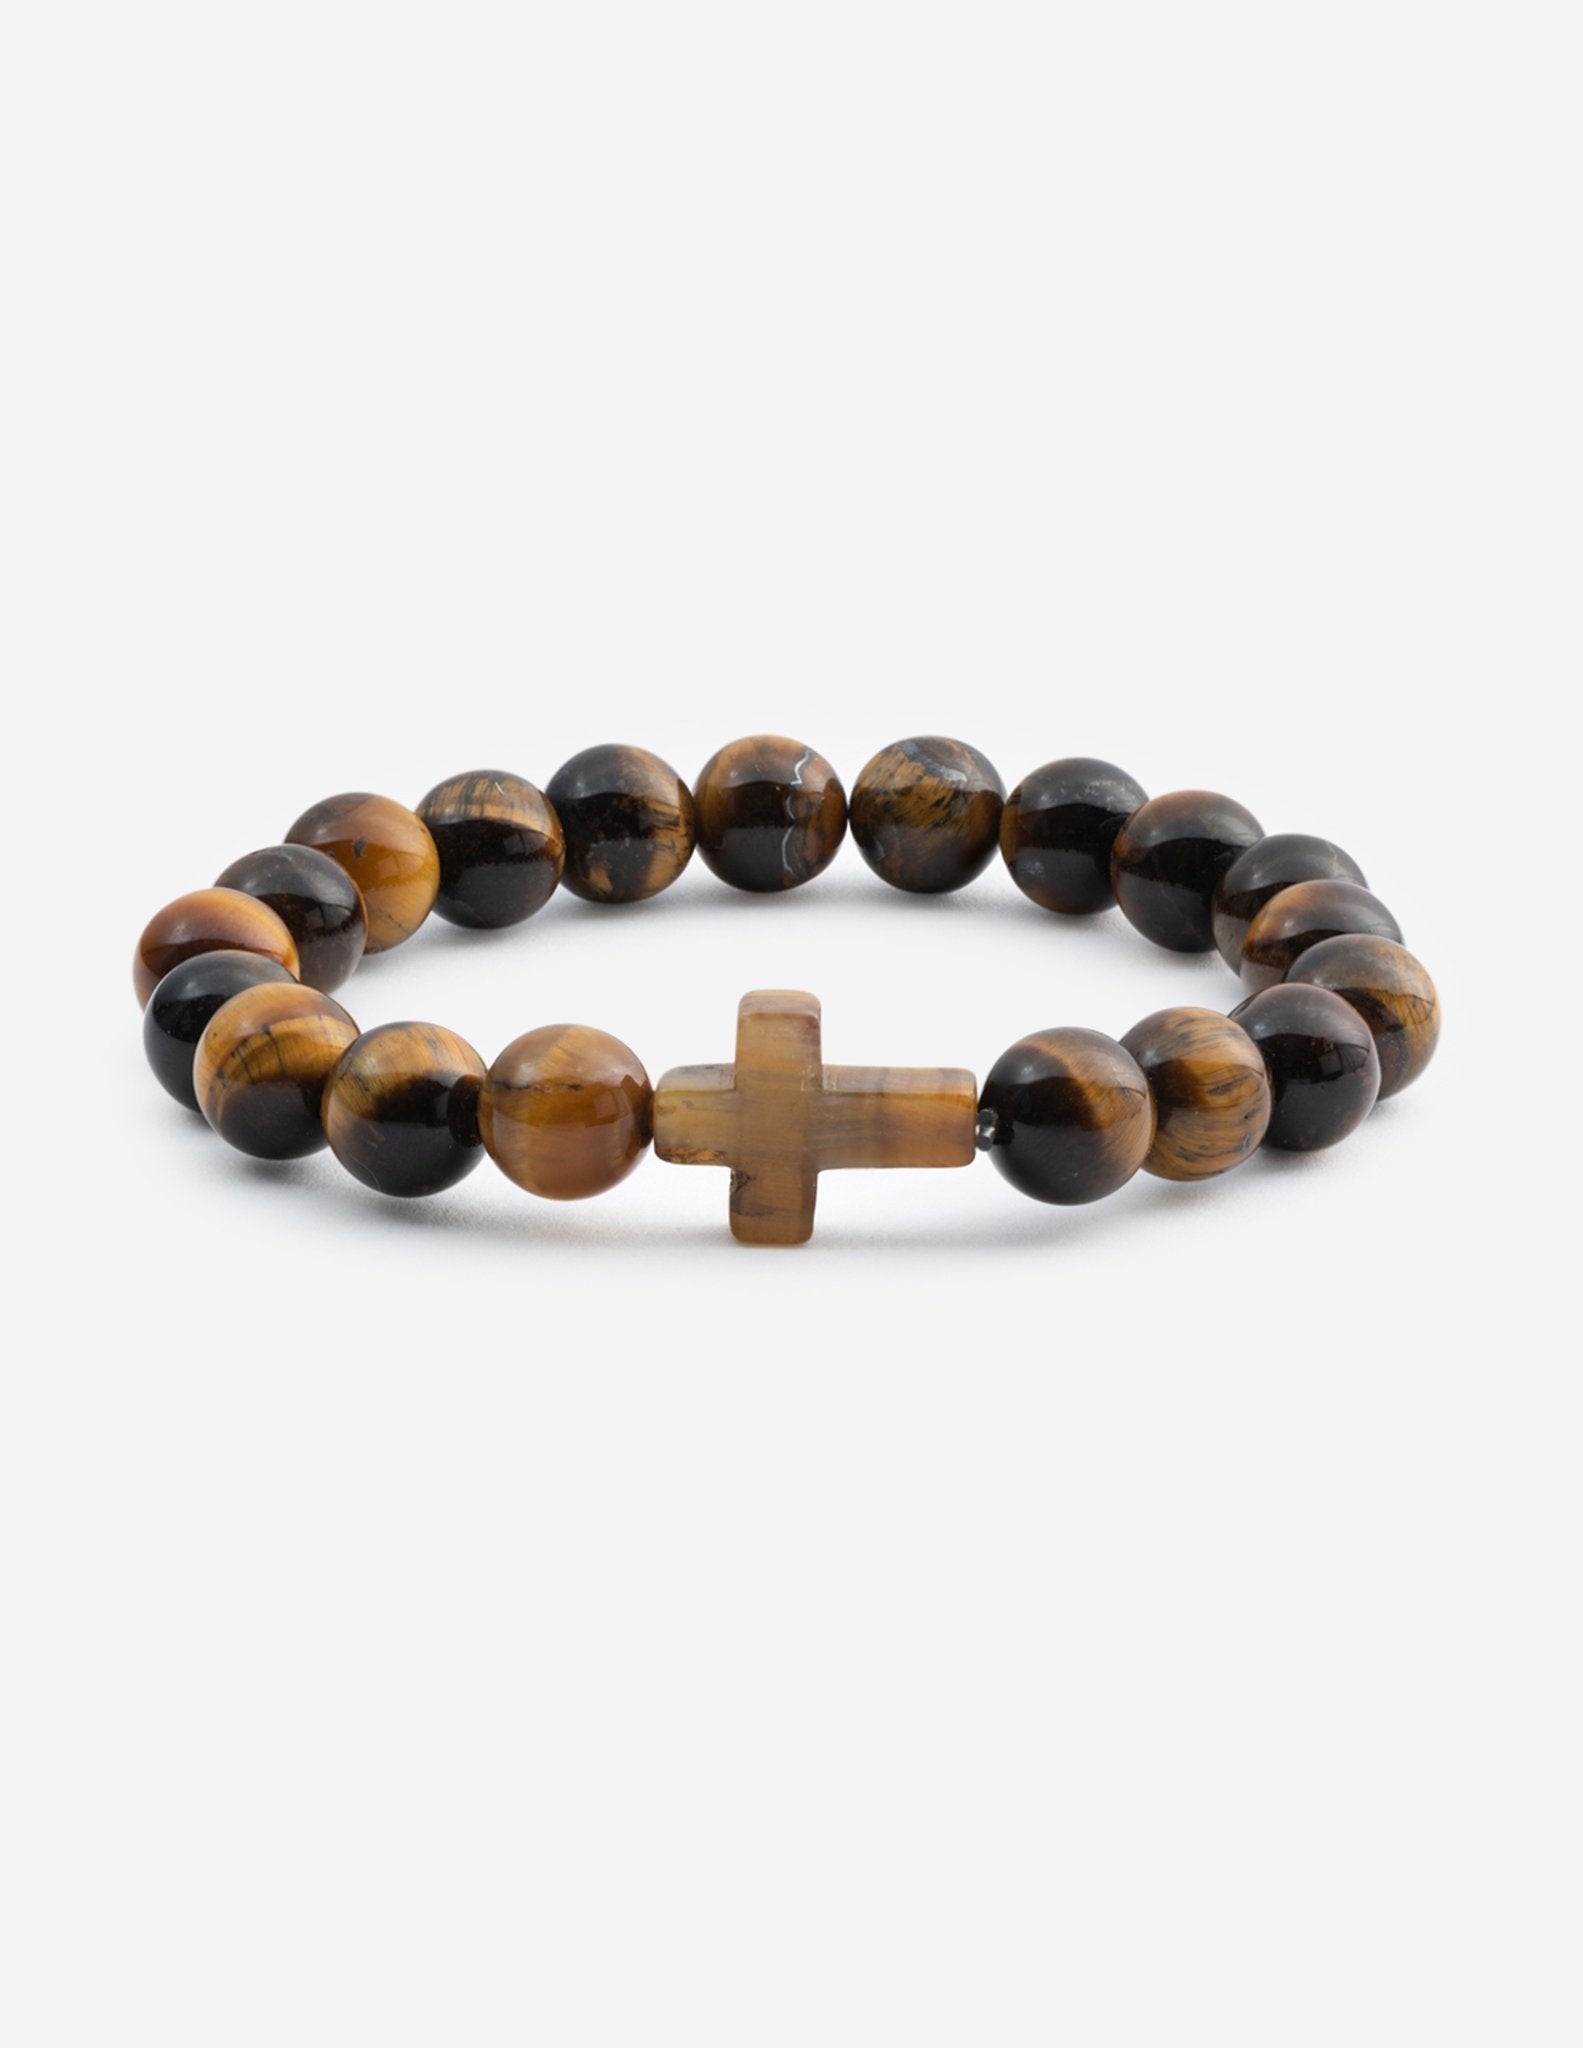 Believe London Tiger Eye Bracelet with Jewelry Bag & Meaning Card | Strong Elastic | Precious Natural Stones Crystal Healing Gemstone Men Women